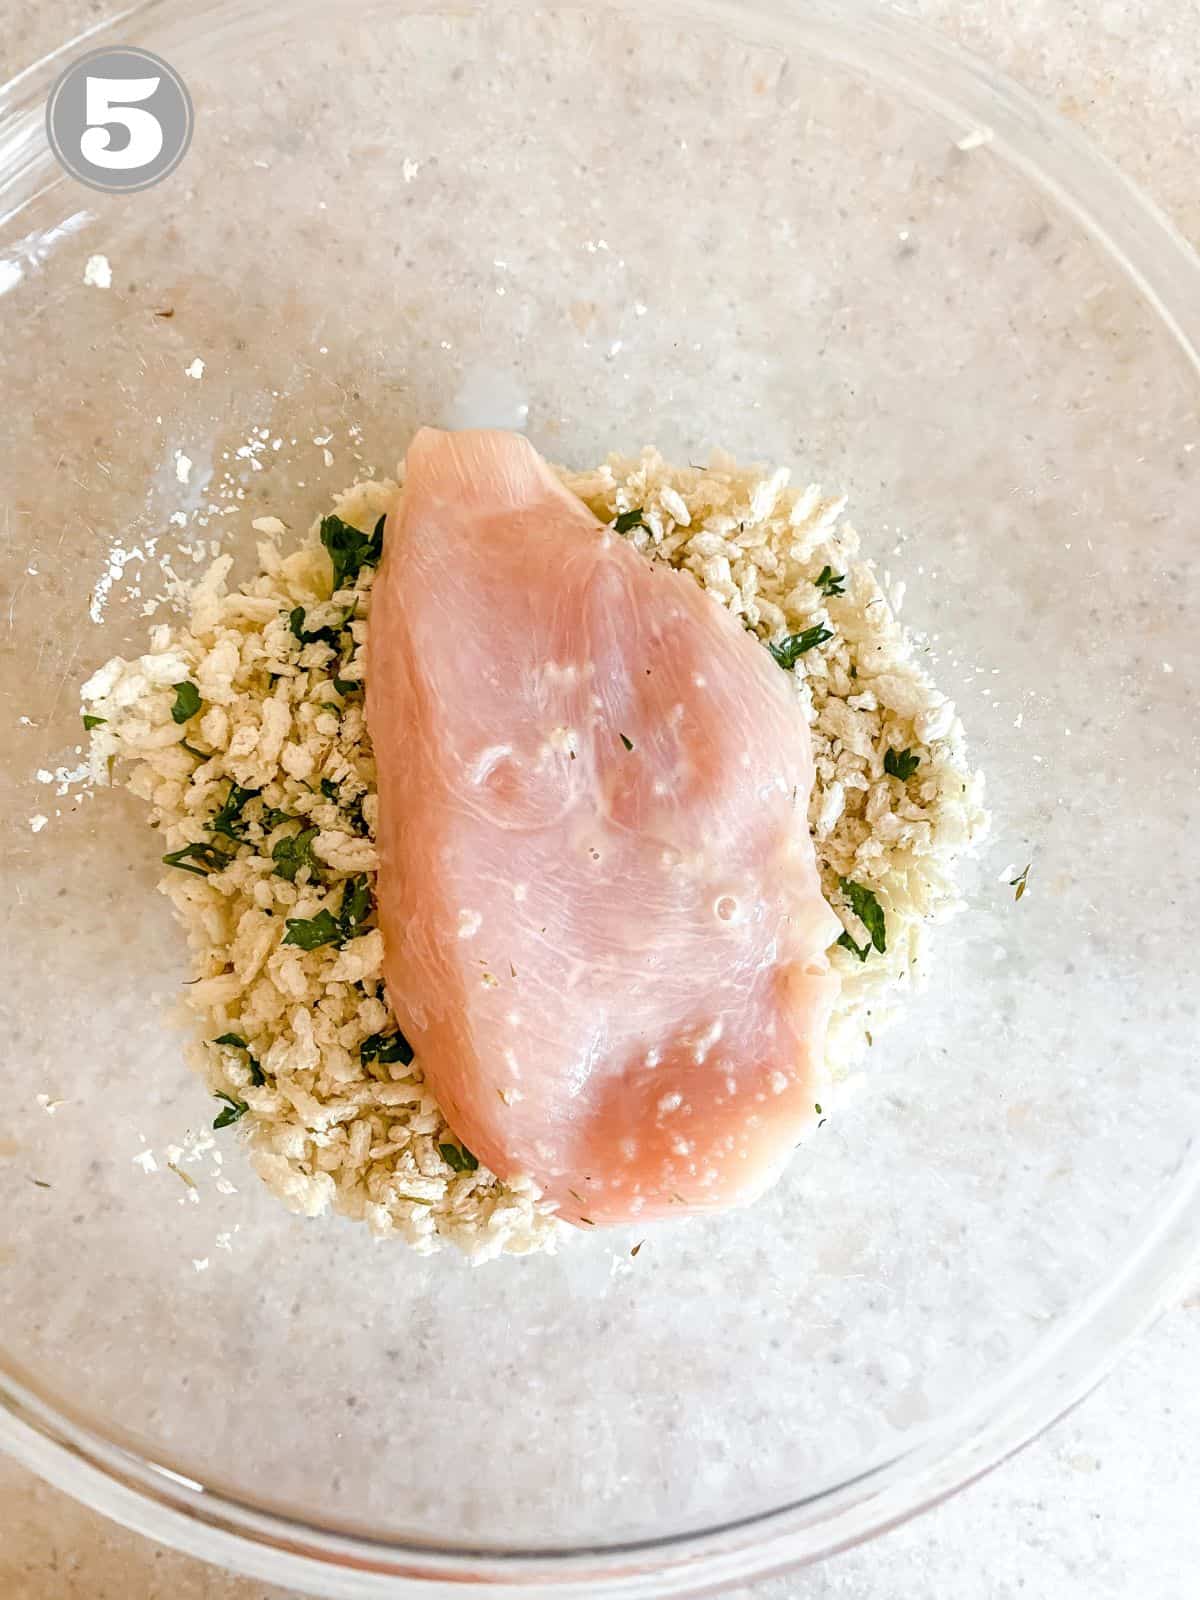 chicken breasts being coated in panko in a glass bowl.